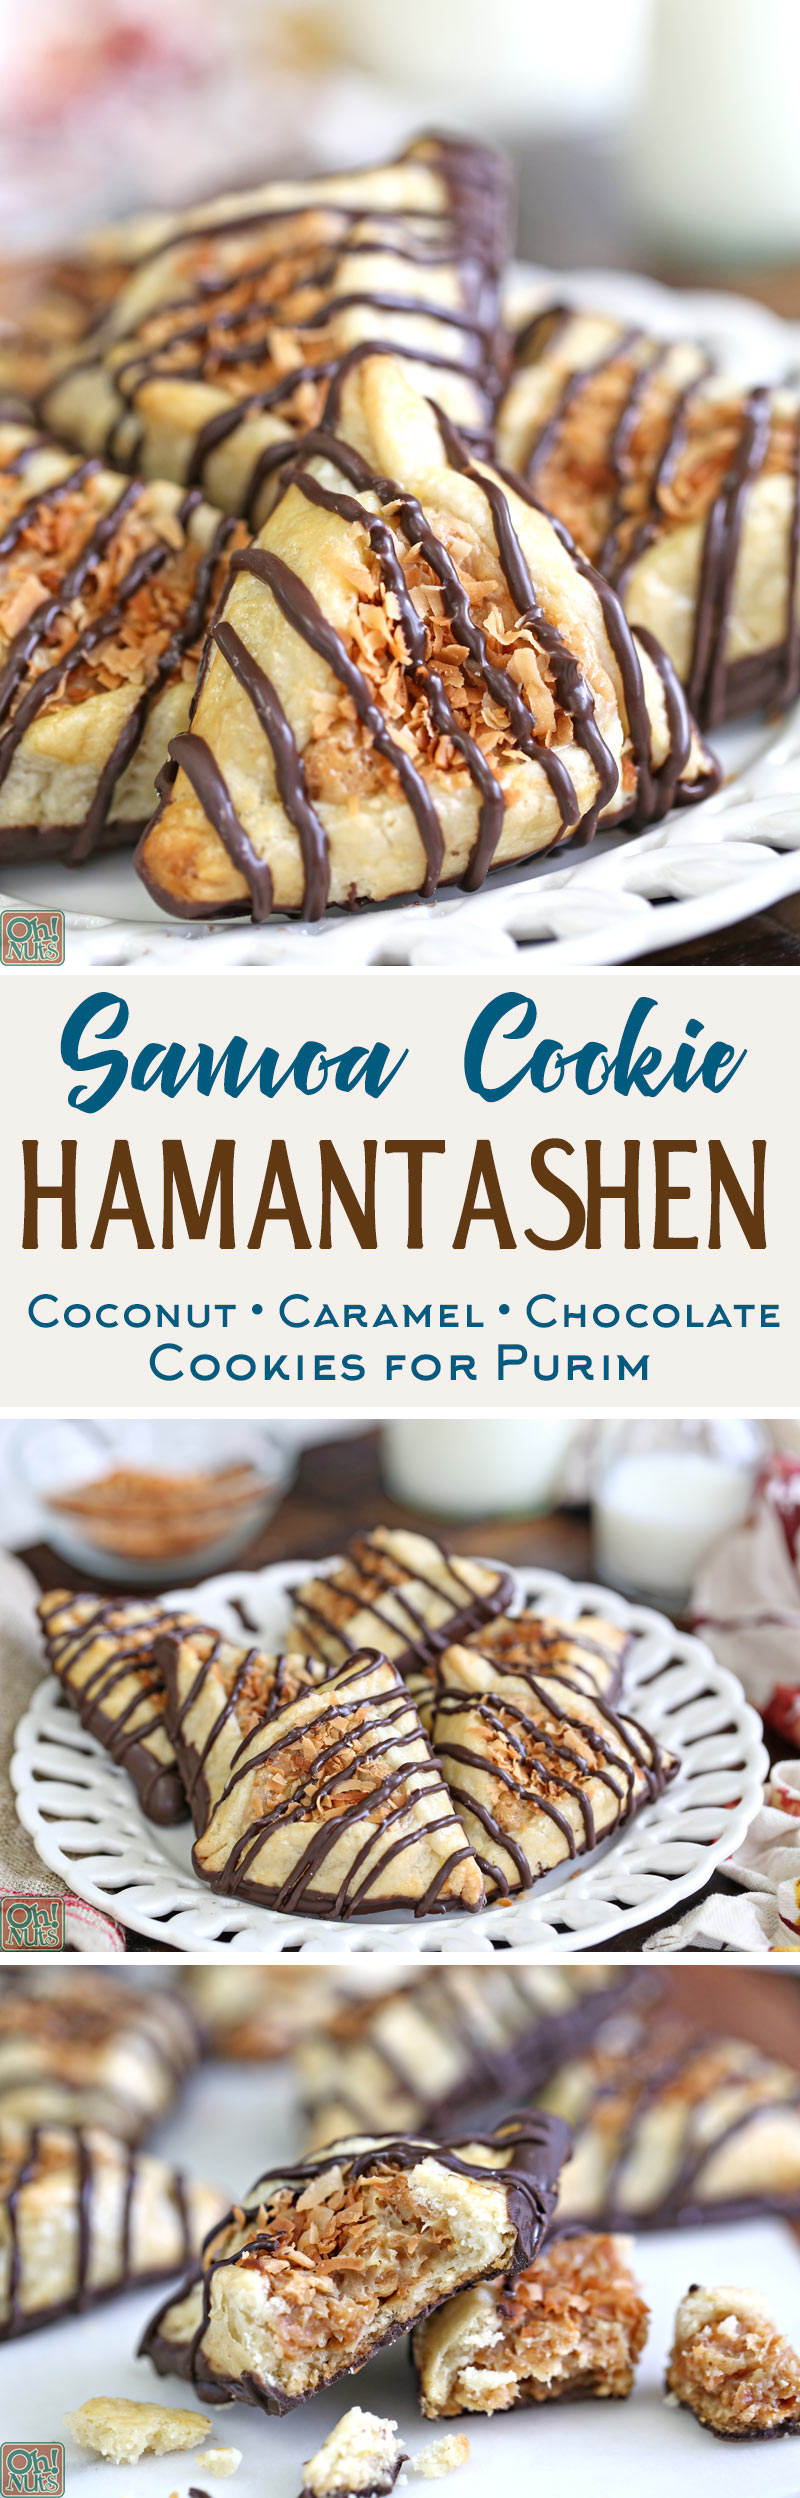 Samoa Cookie Hamantashen - Purim cookies with caramel, toasted coconut, and chocolate | From OhNuts.com